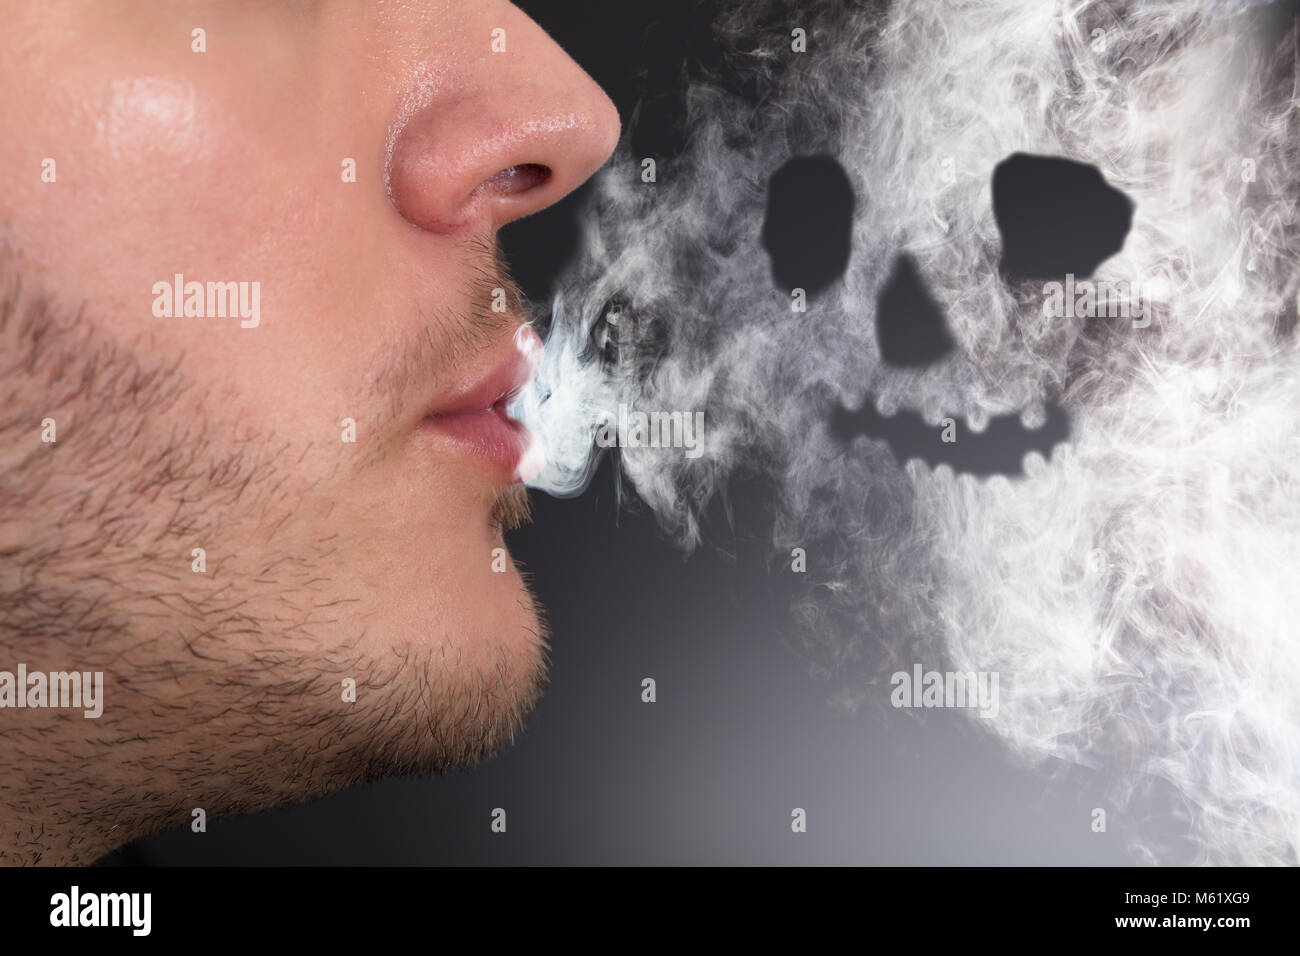 Close-up Of A Man Smoking Skull Shape Formed Stock Photo